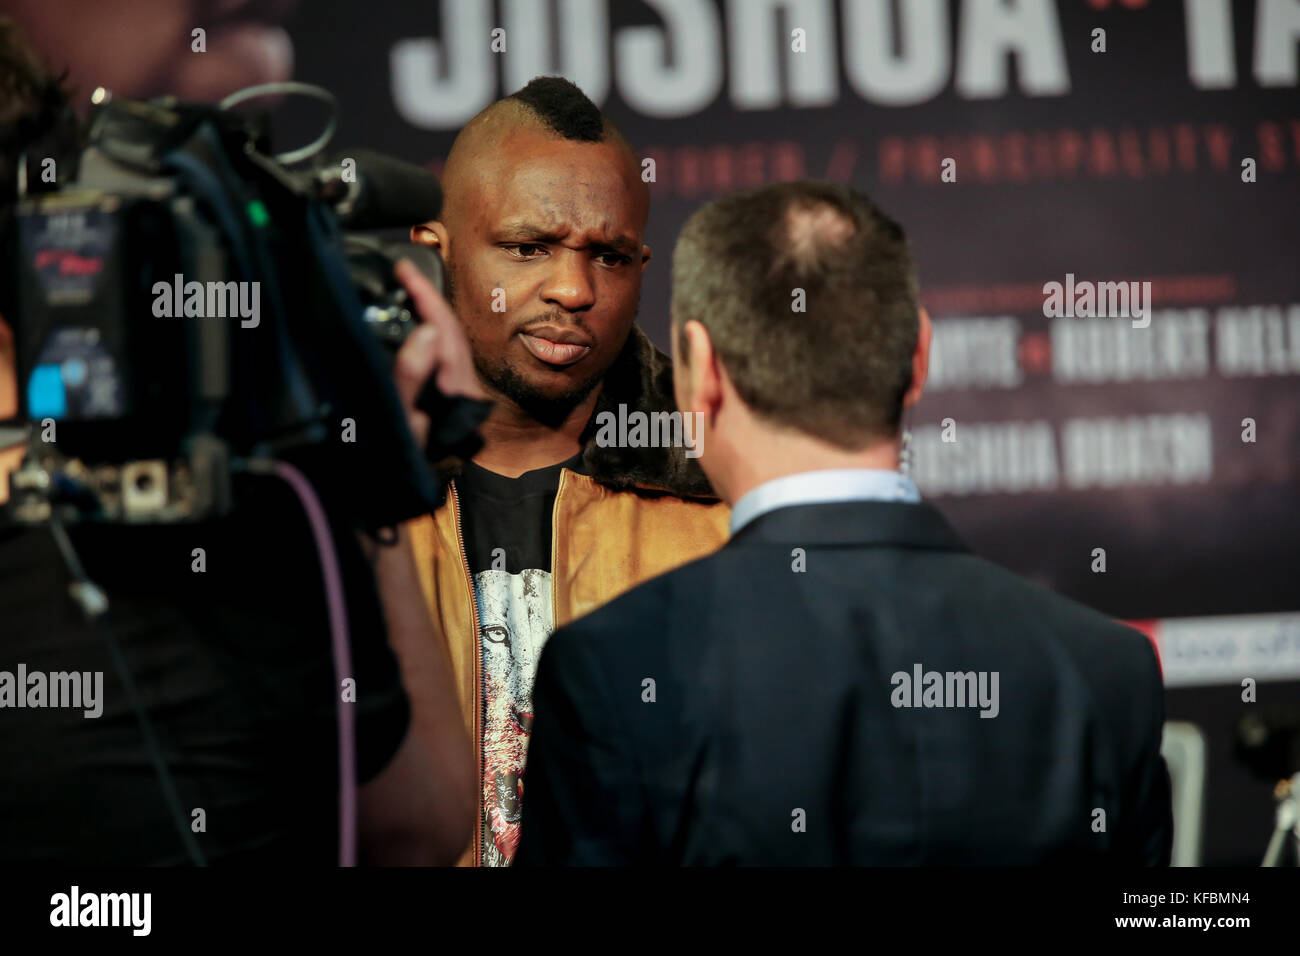 Cardiff University, Cardiff,  Wales, UK  26th October 2017,  Heavy Weight Fight. Press Conference  DILLIAN WHYTE v ROBERT HELENIUS   Whyte wearing Brown Jacket  Credit Huw Fairclough/Alamy News Stock Photo